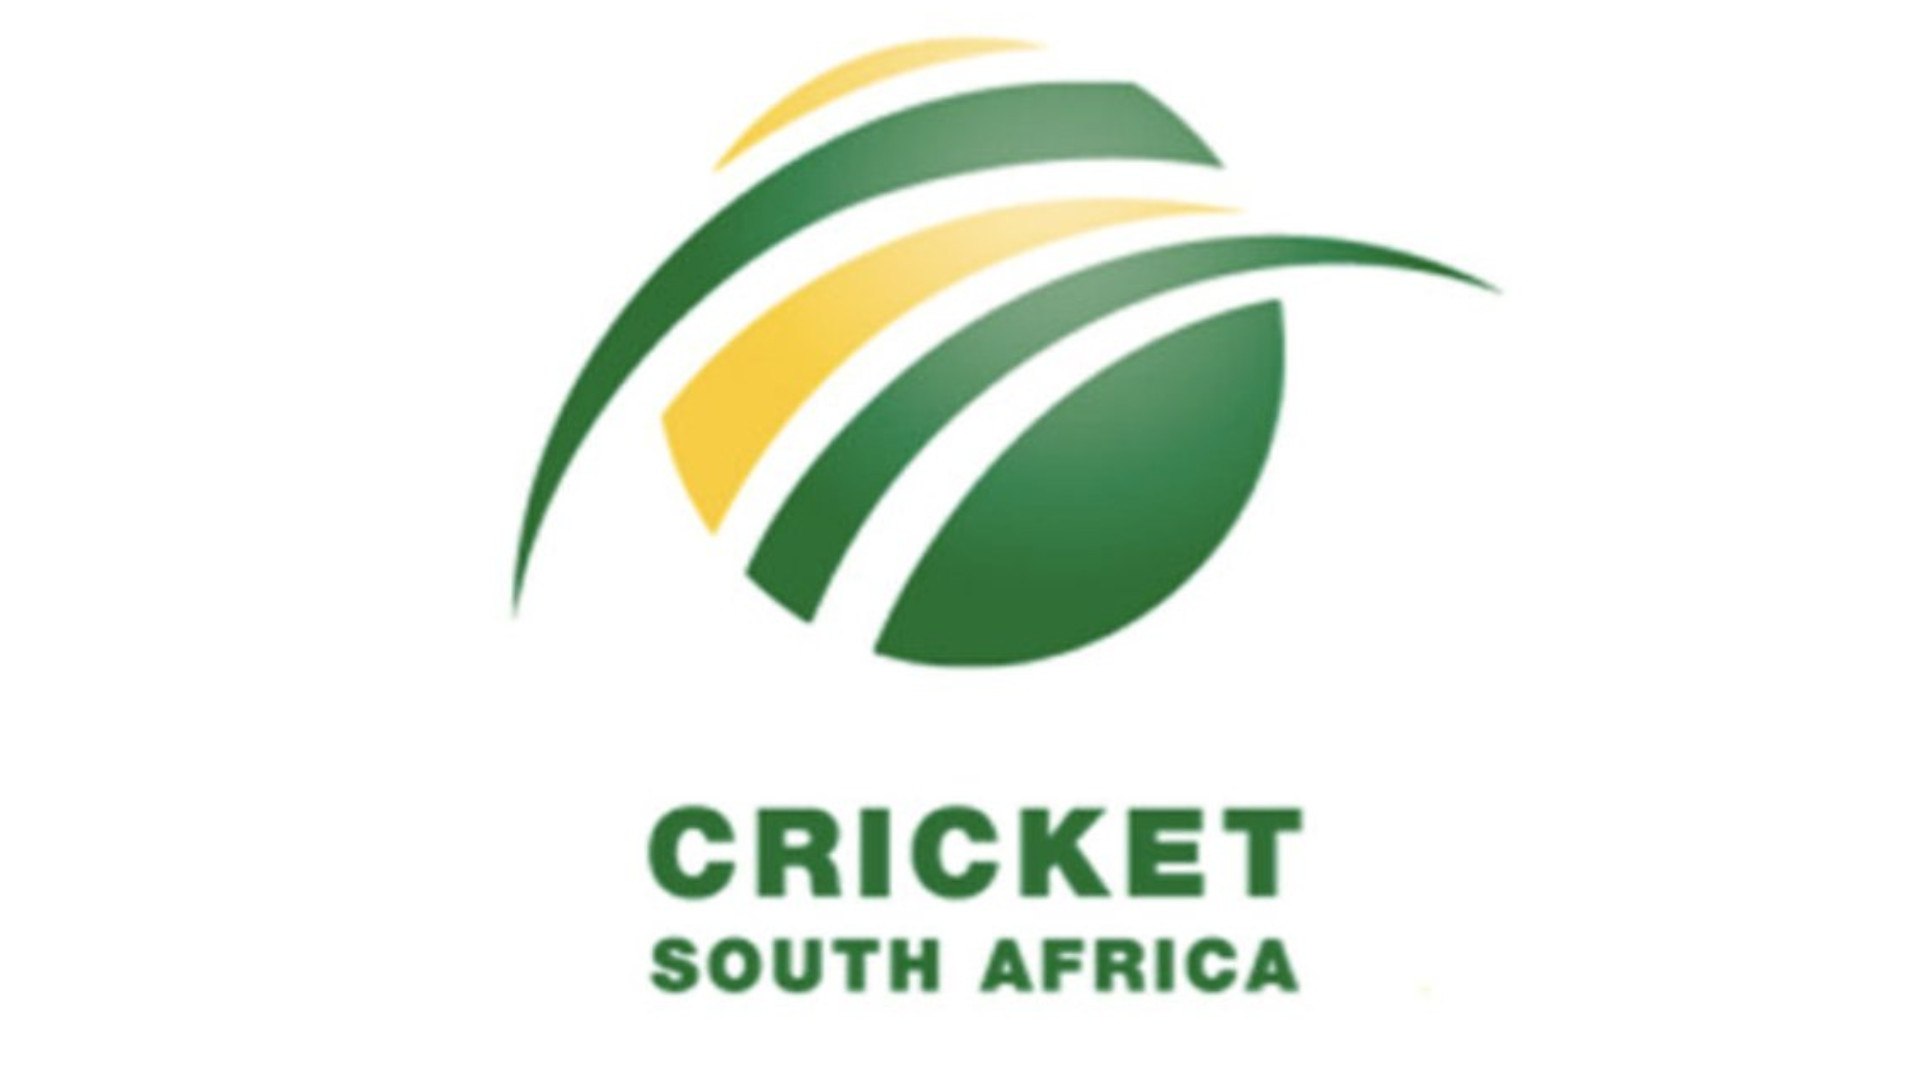 Cricket South Africa has potentially avoided being derecognised and defunded. (Image Credit: Twitter)